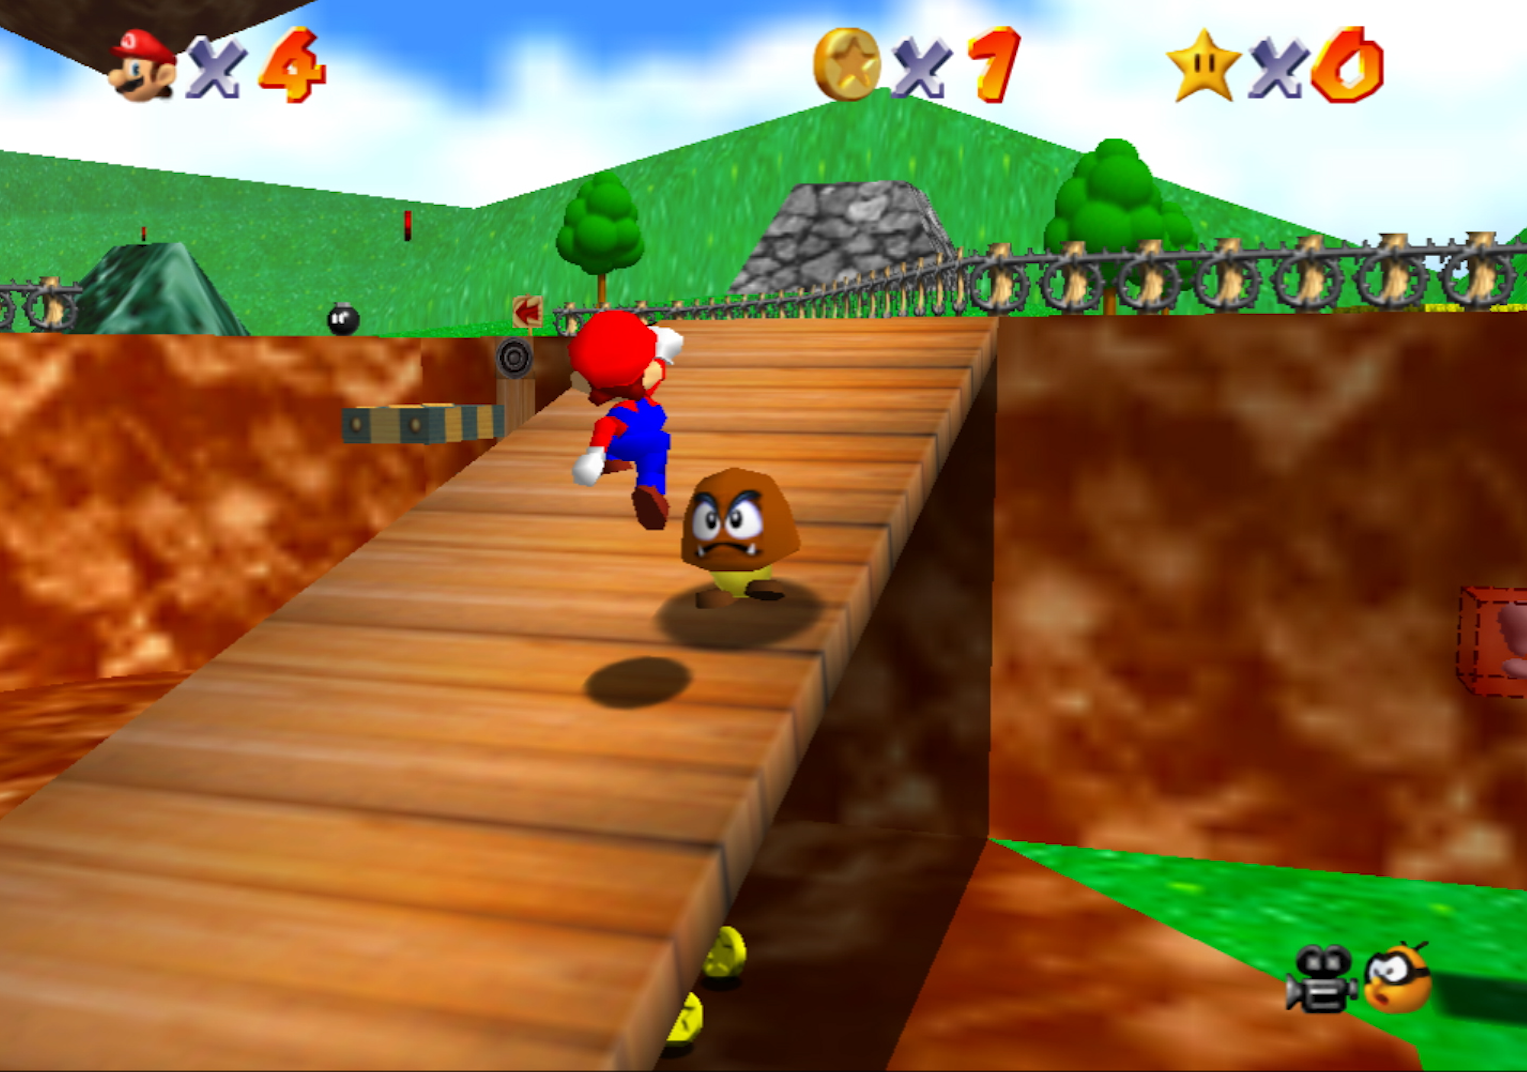 I Finally Beat Super Mario 64 Revisiting The Classic Game 23 Years By James O Connor Superjump Medium